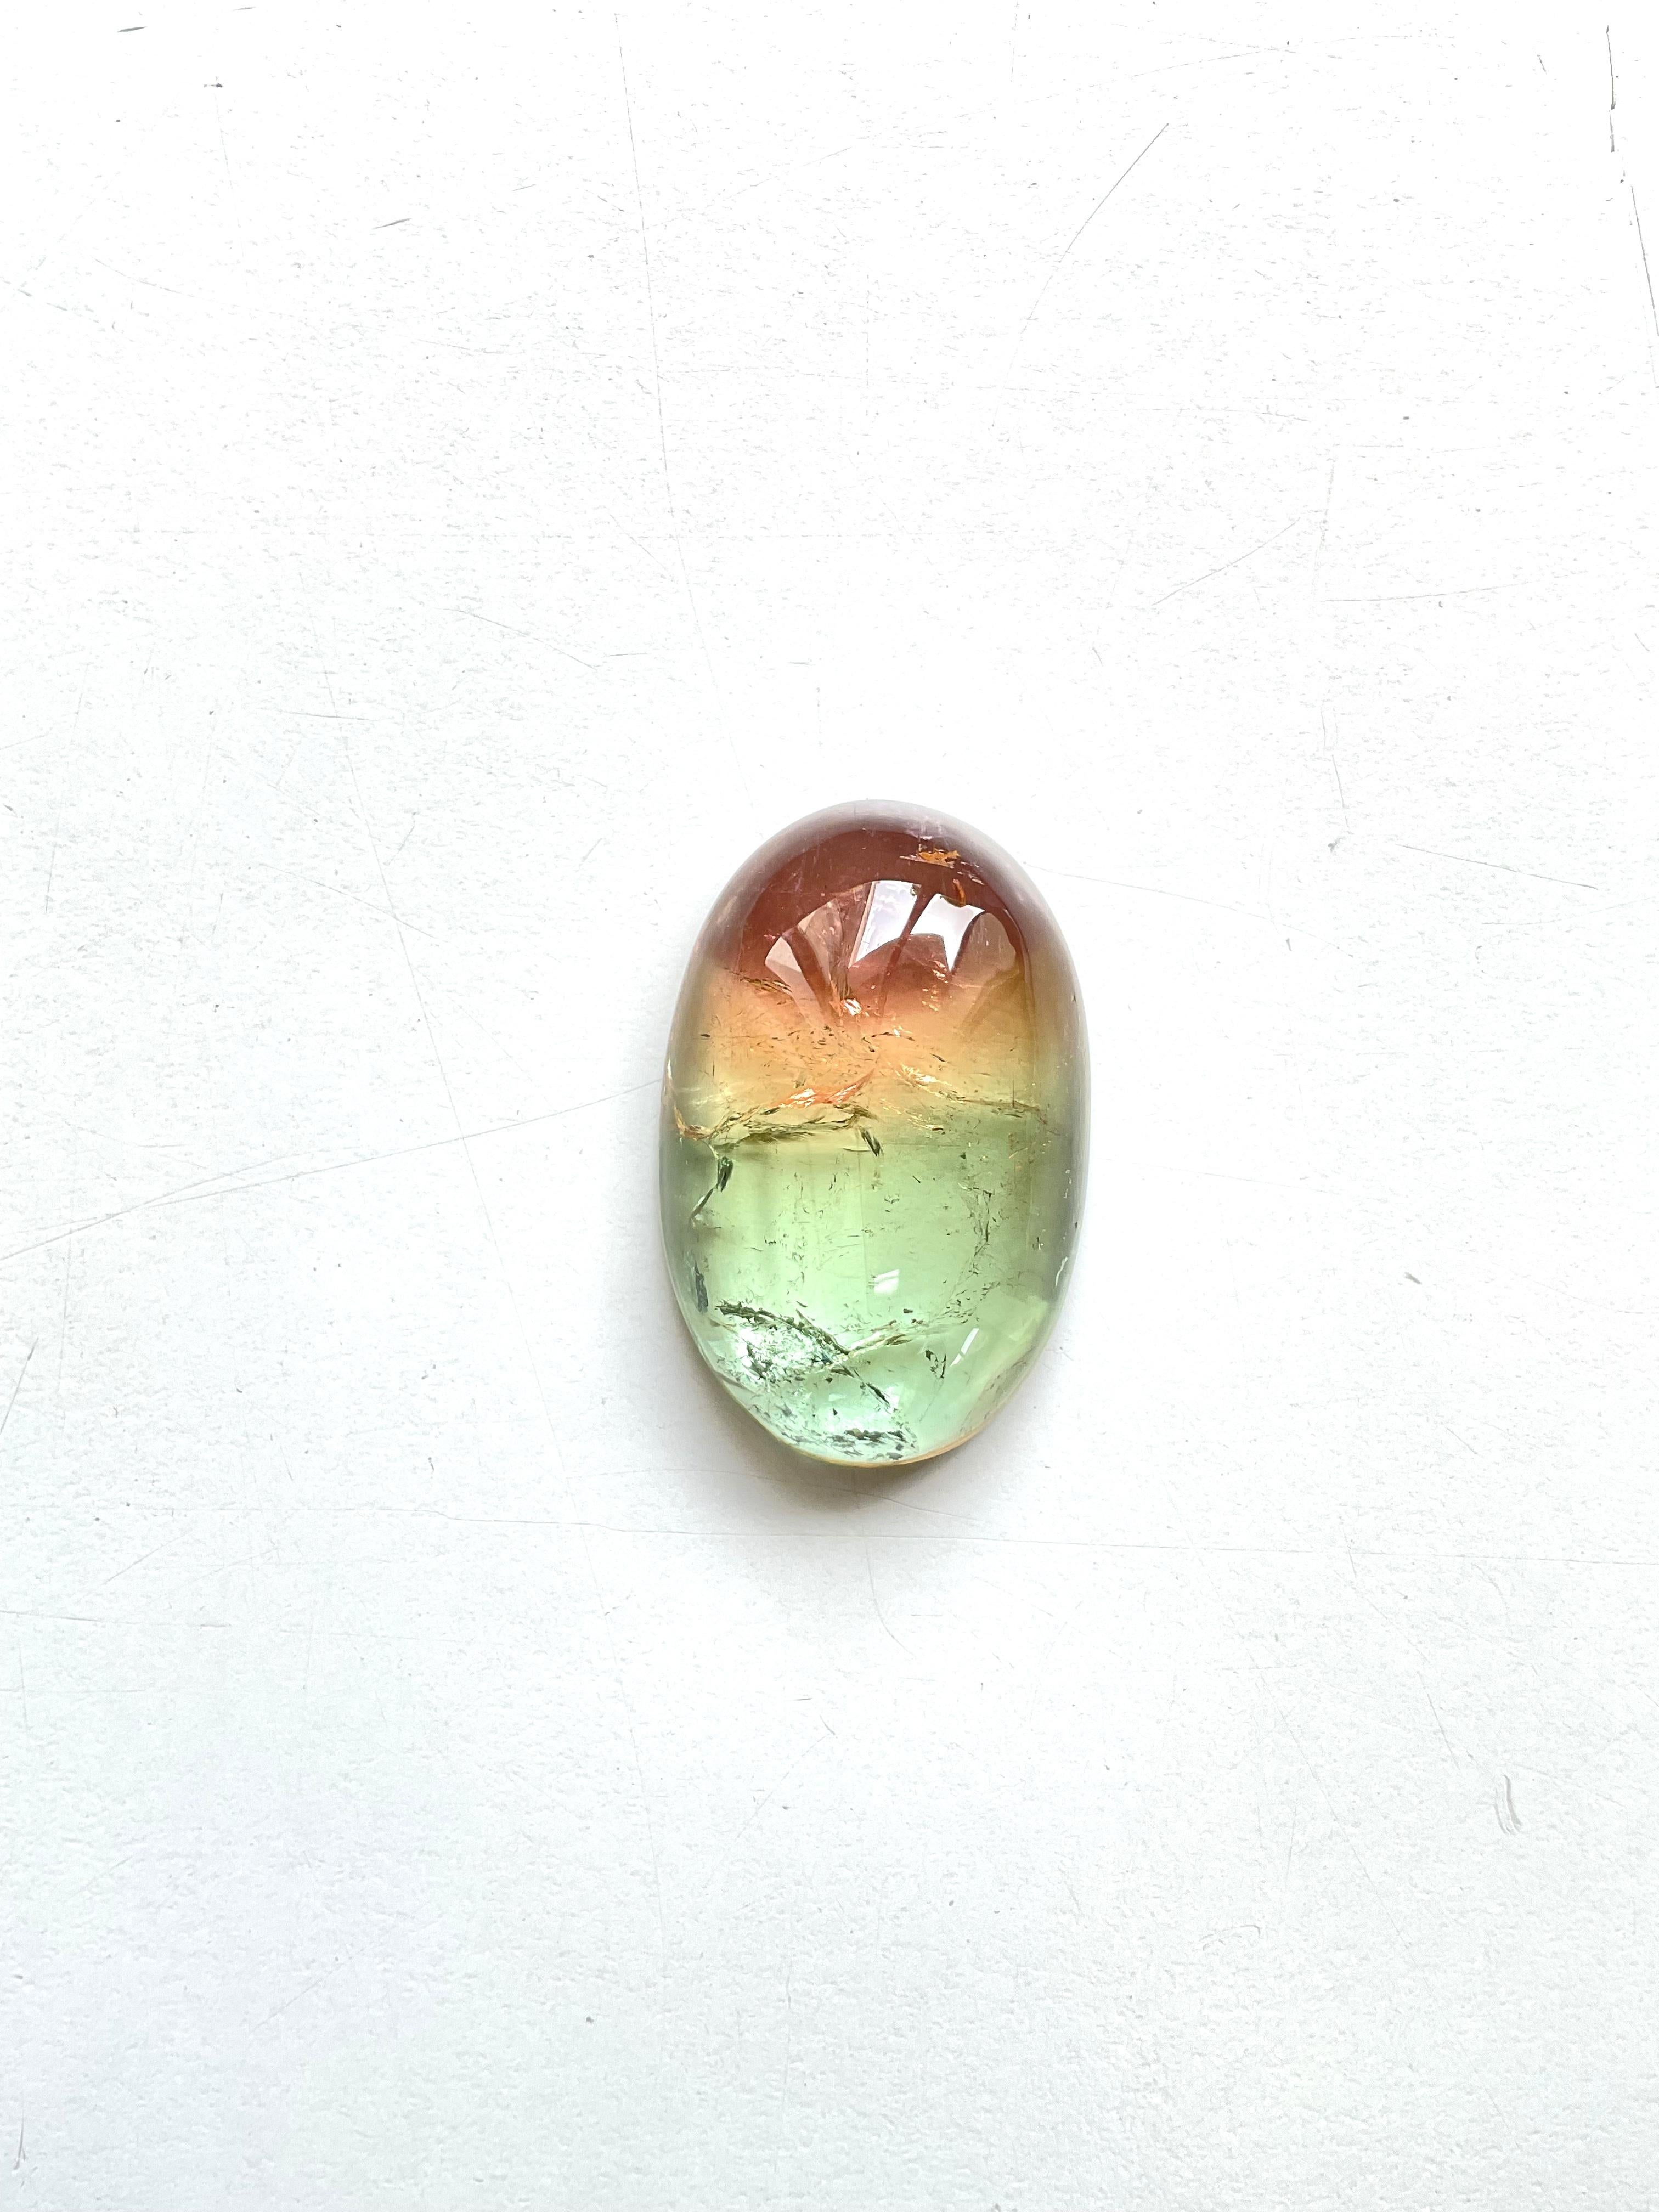 105.03 Carats Bi Color Tourmaline Oval cabochon very good quality color variety For Sale 1